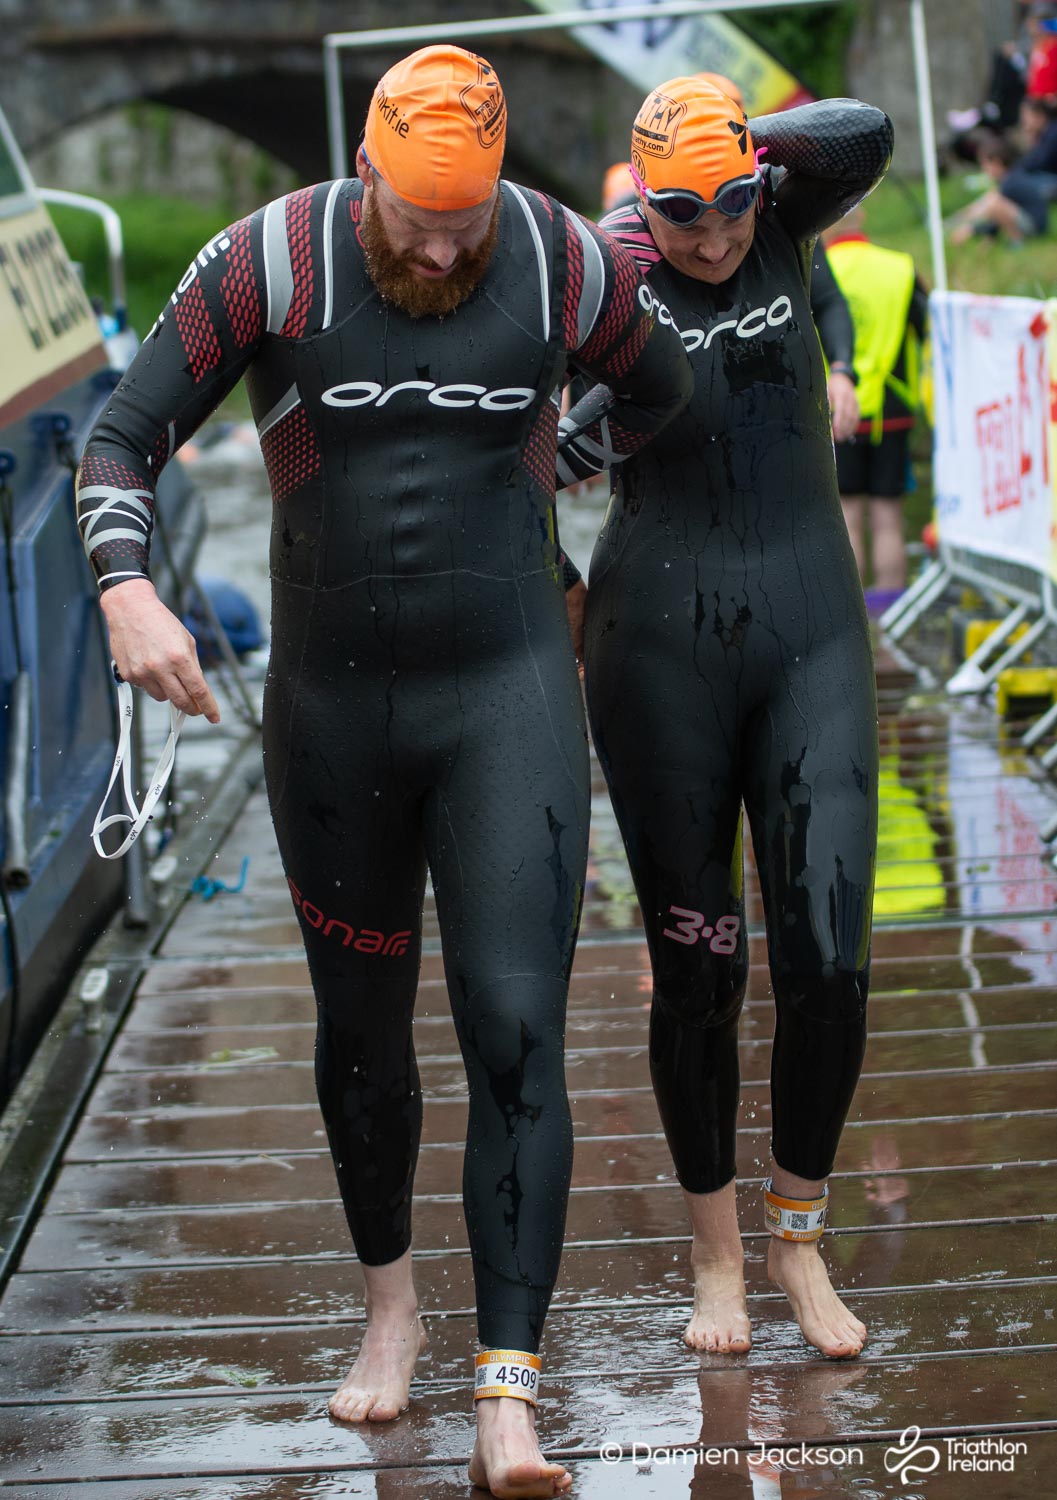 Athy_2018 (284 of 526) - TriAthy - XII Edition - 2nd June 2018